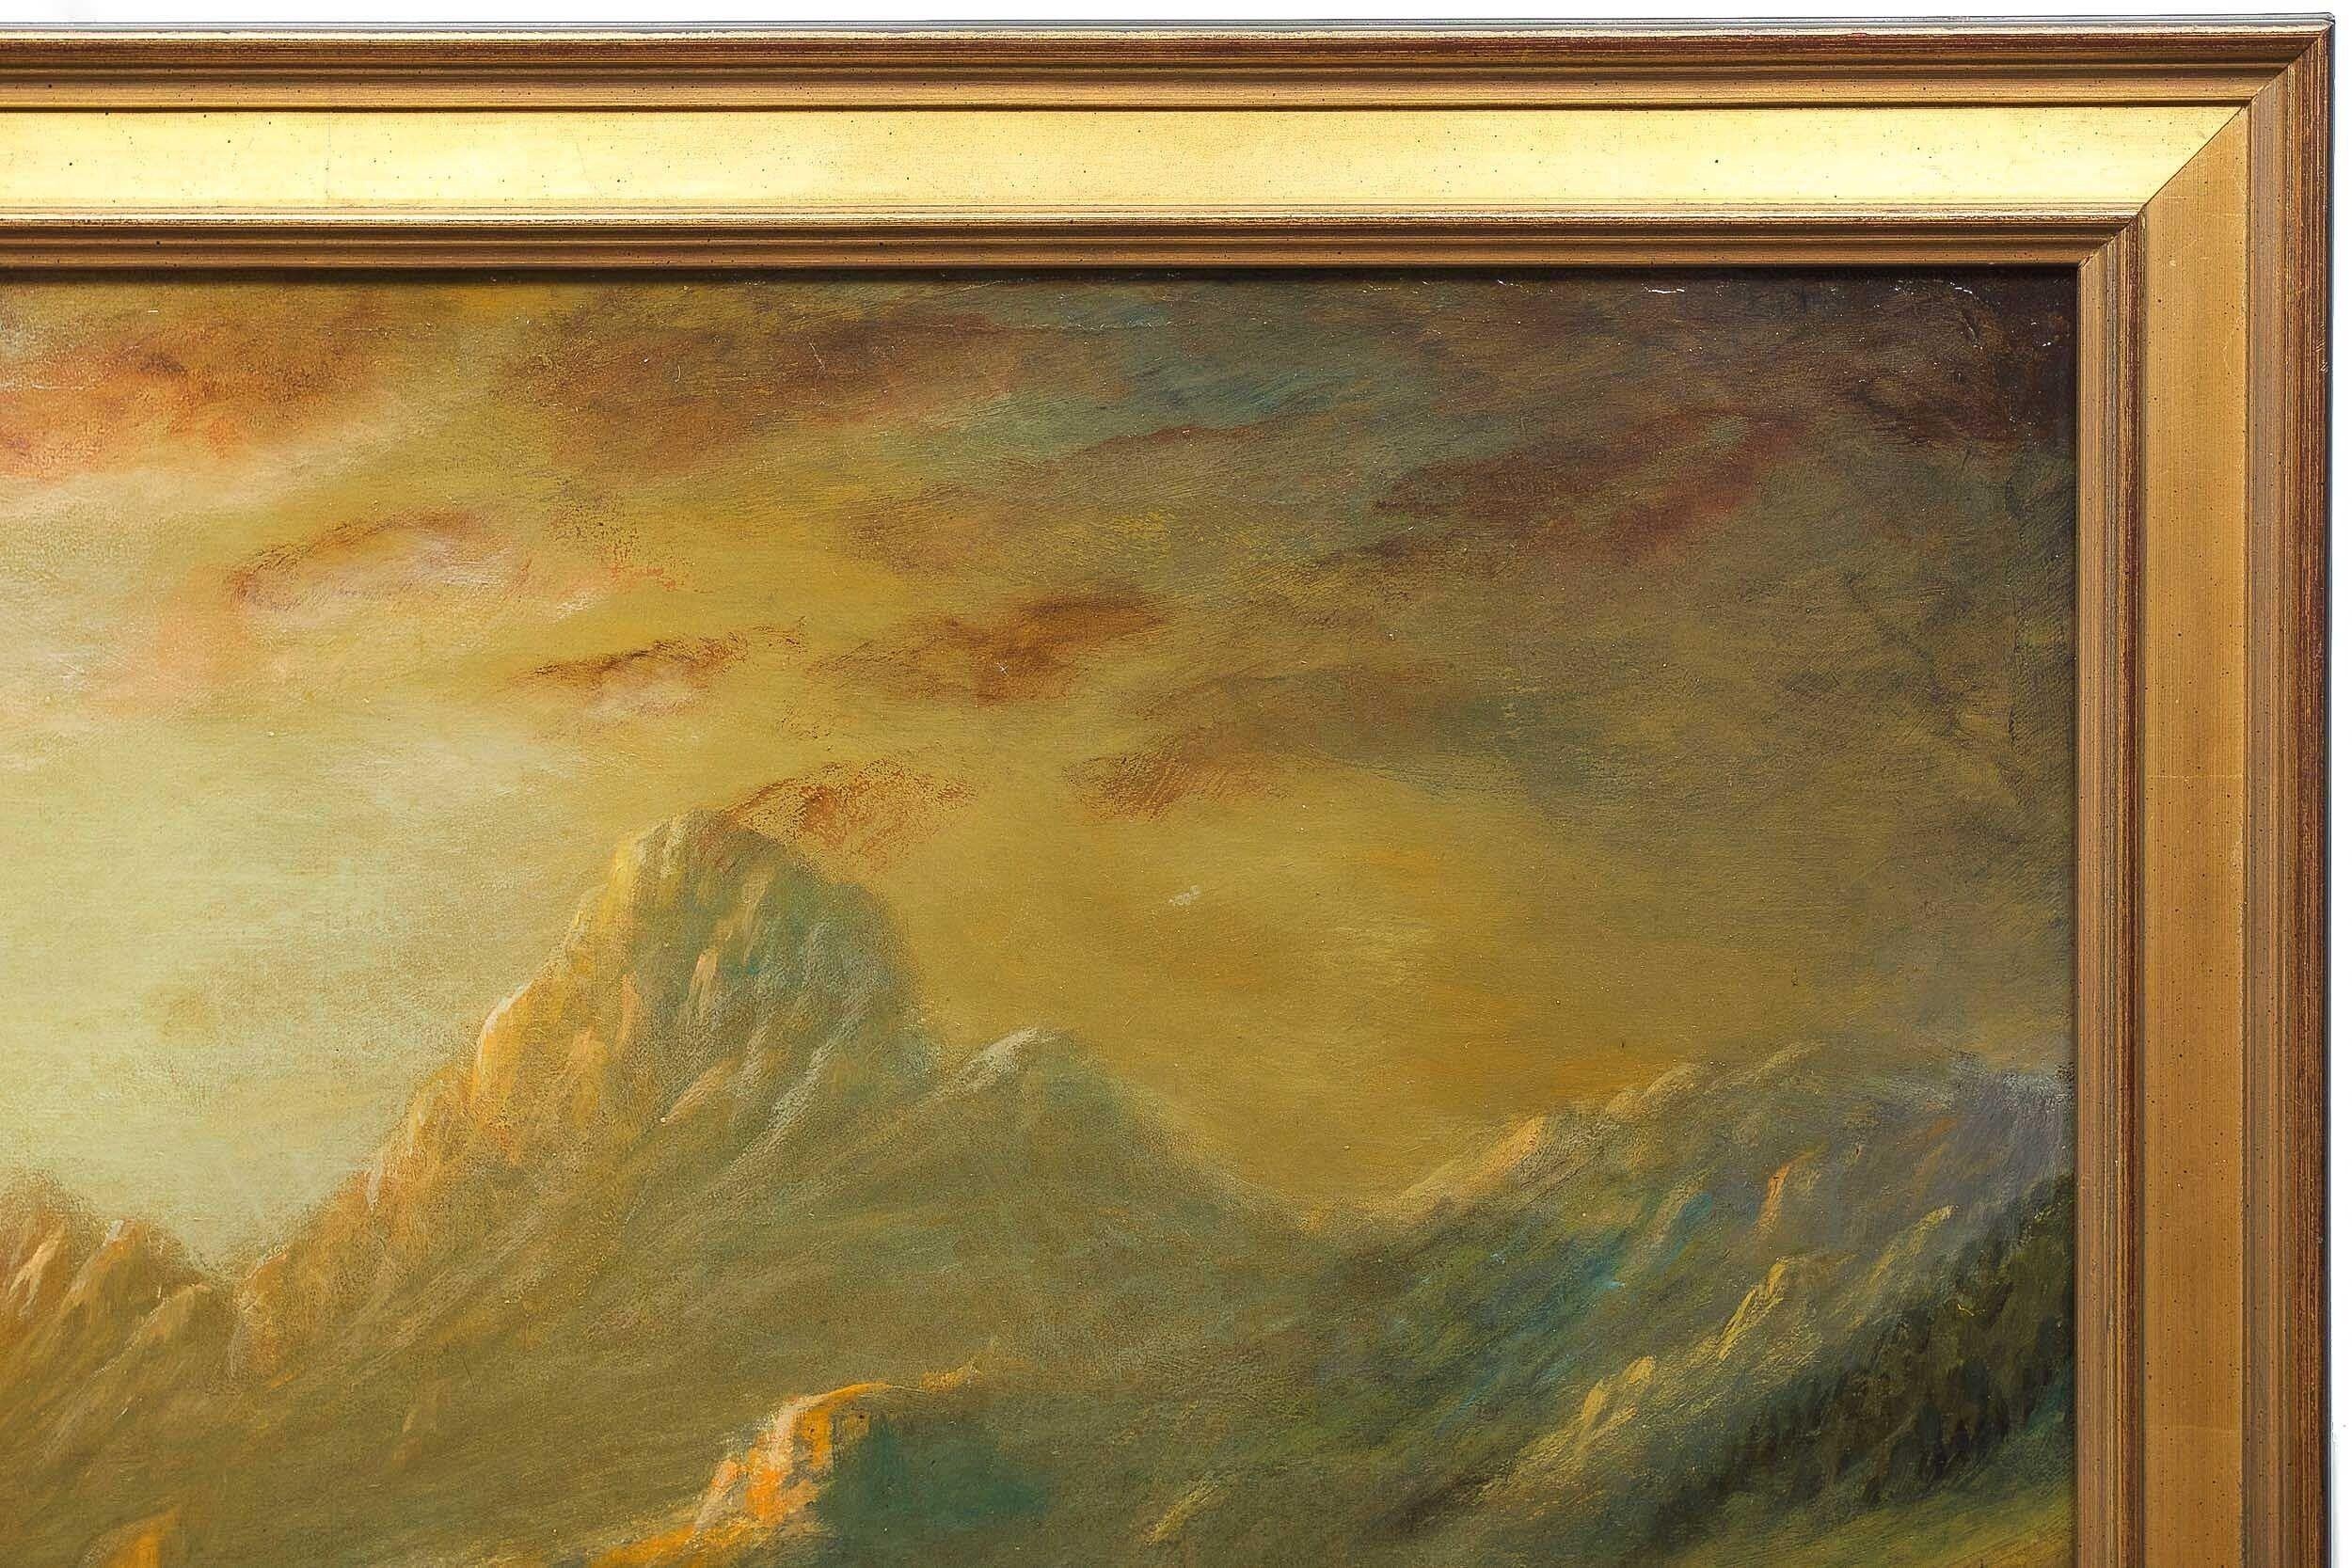 American Antique Landscape Painting of a Mountain Range by James Hamilton 14